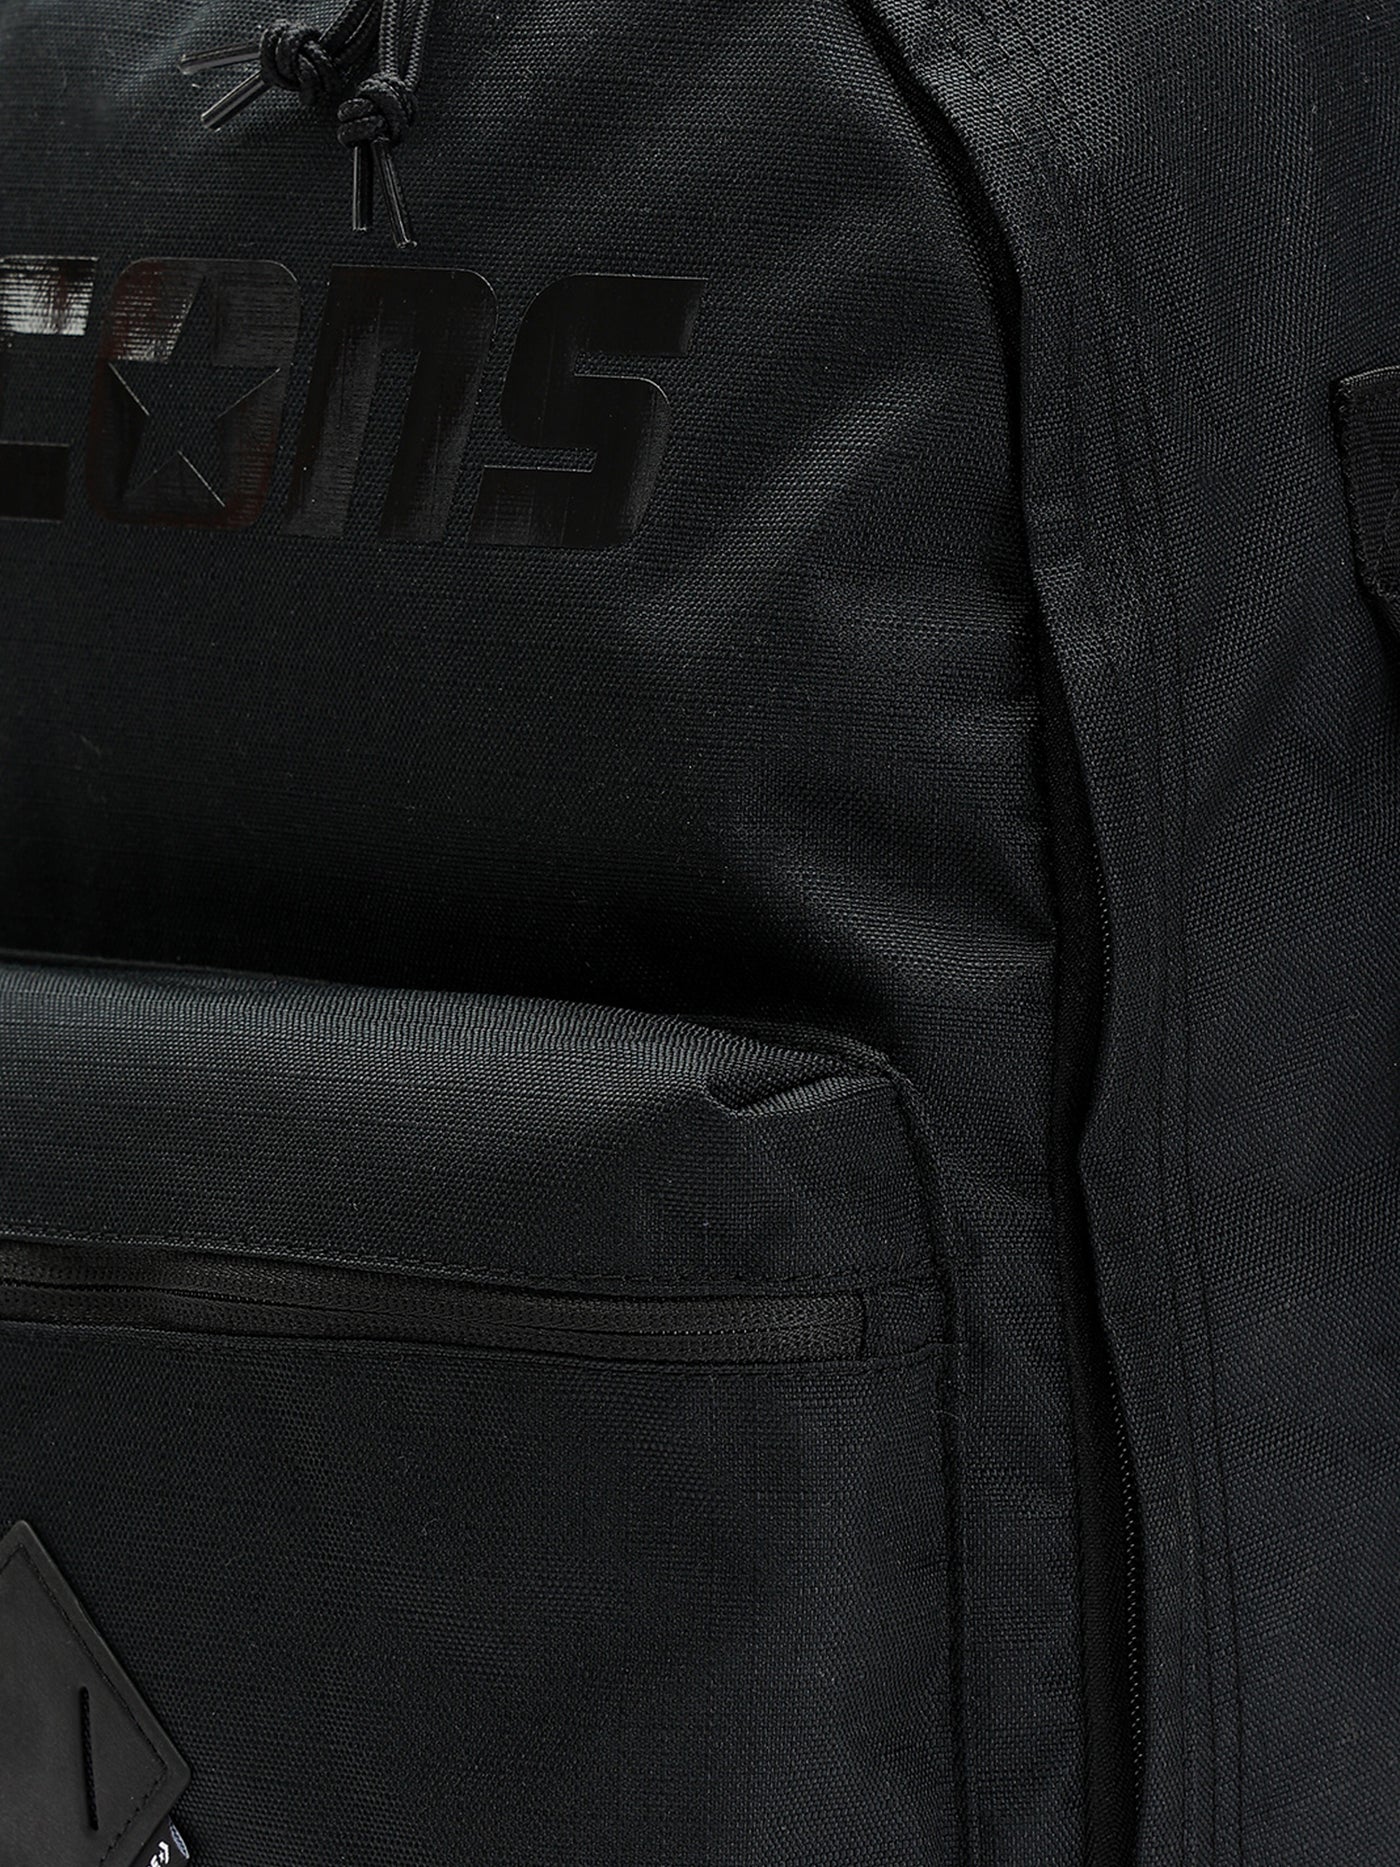 Unisex Backpack - Go 2 - "CONS"